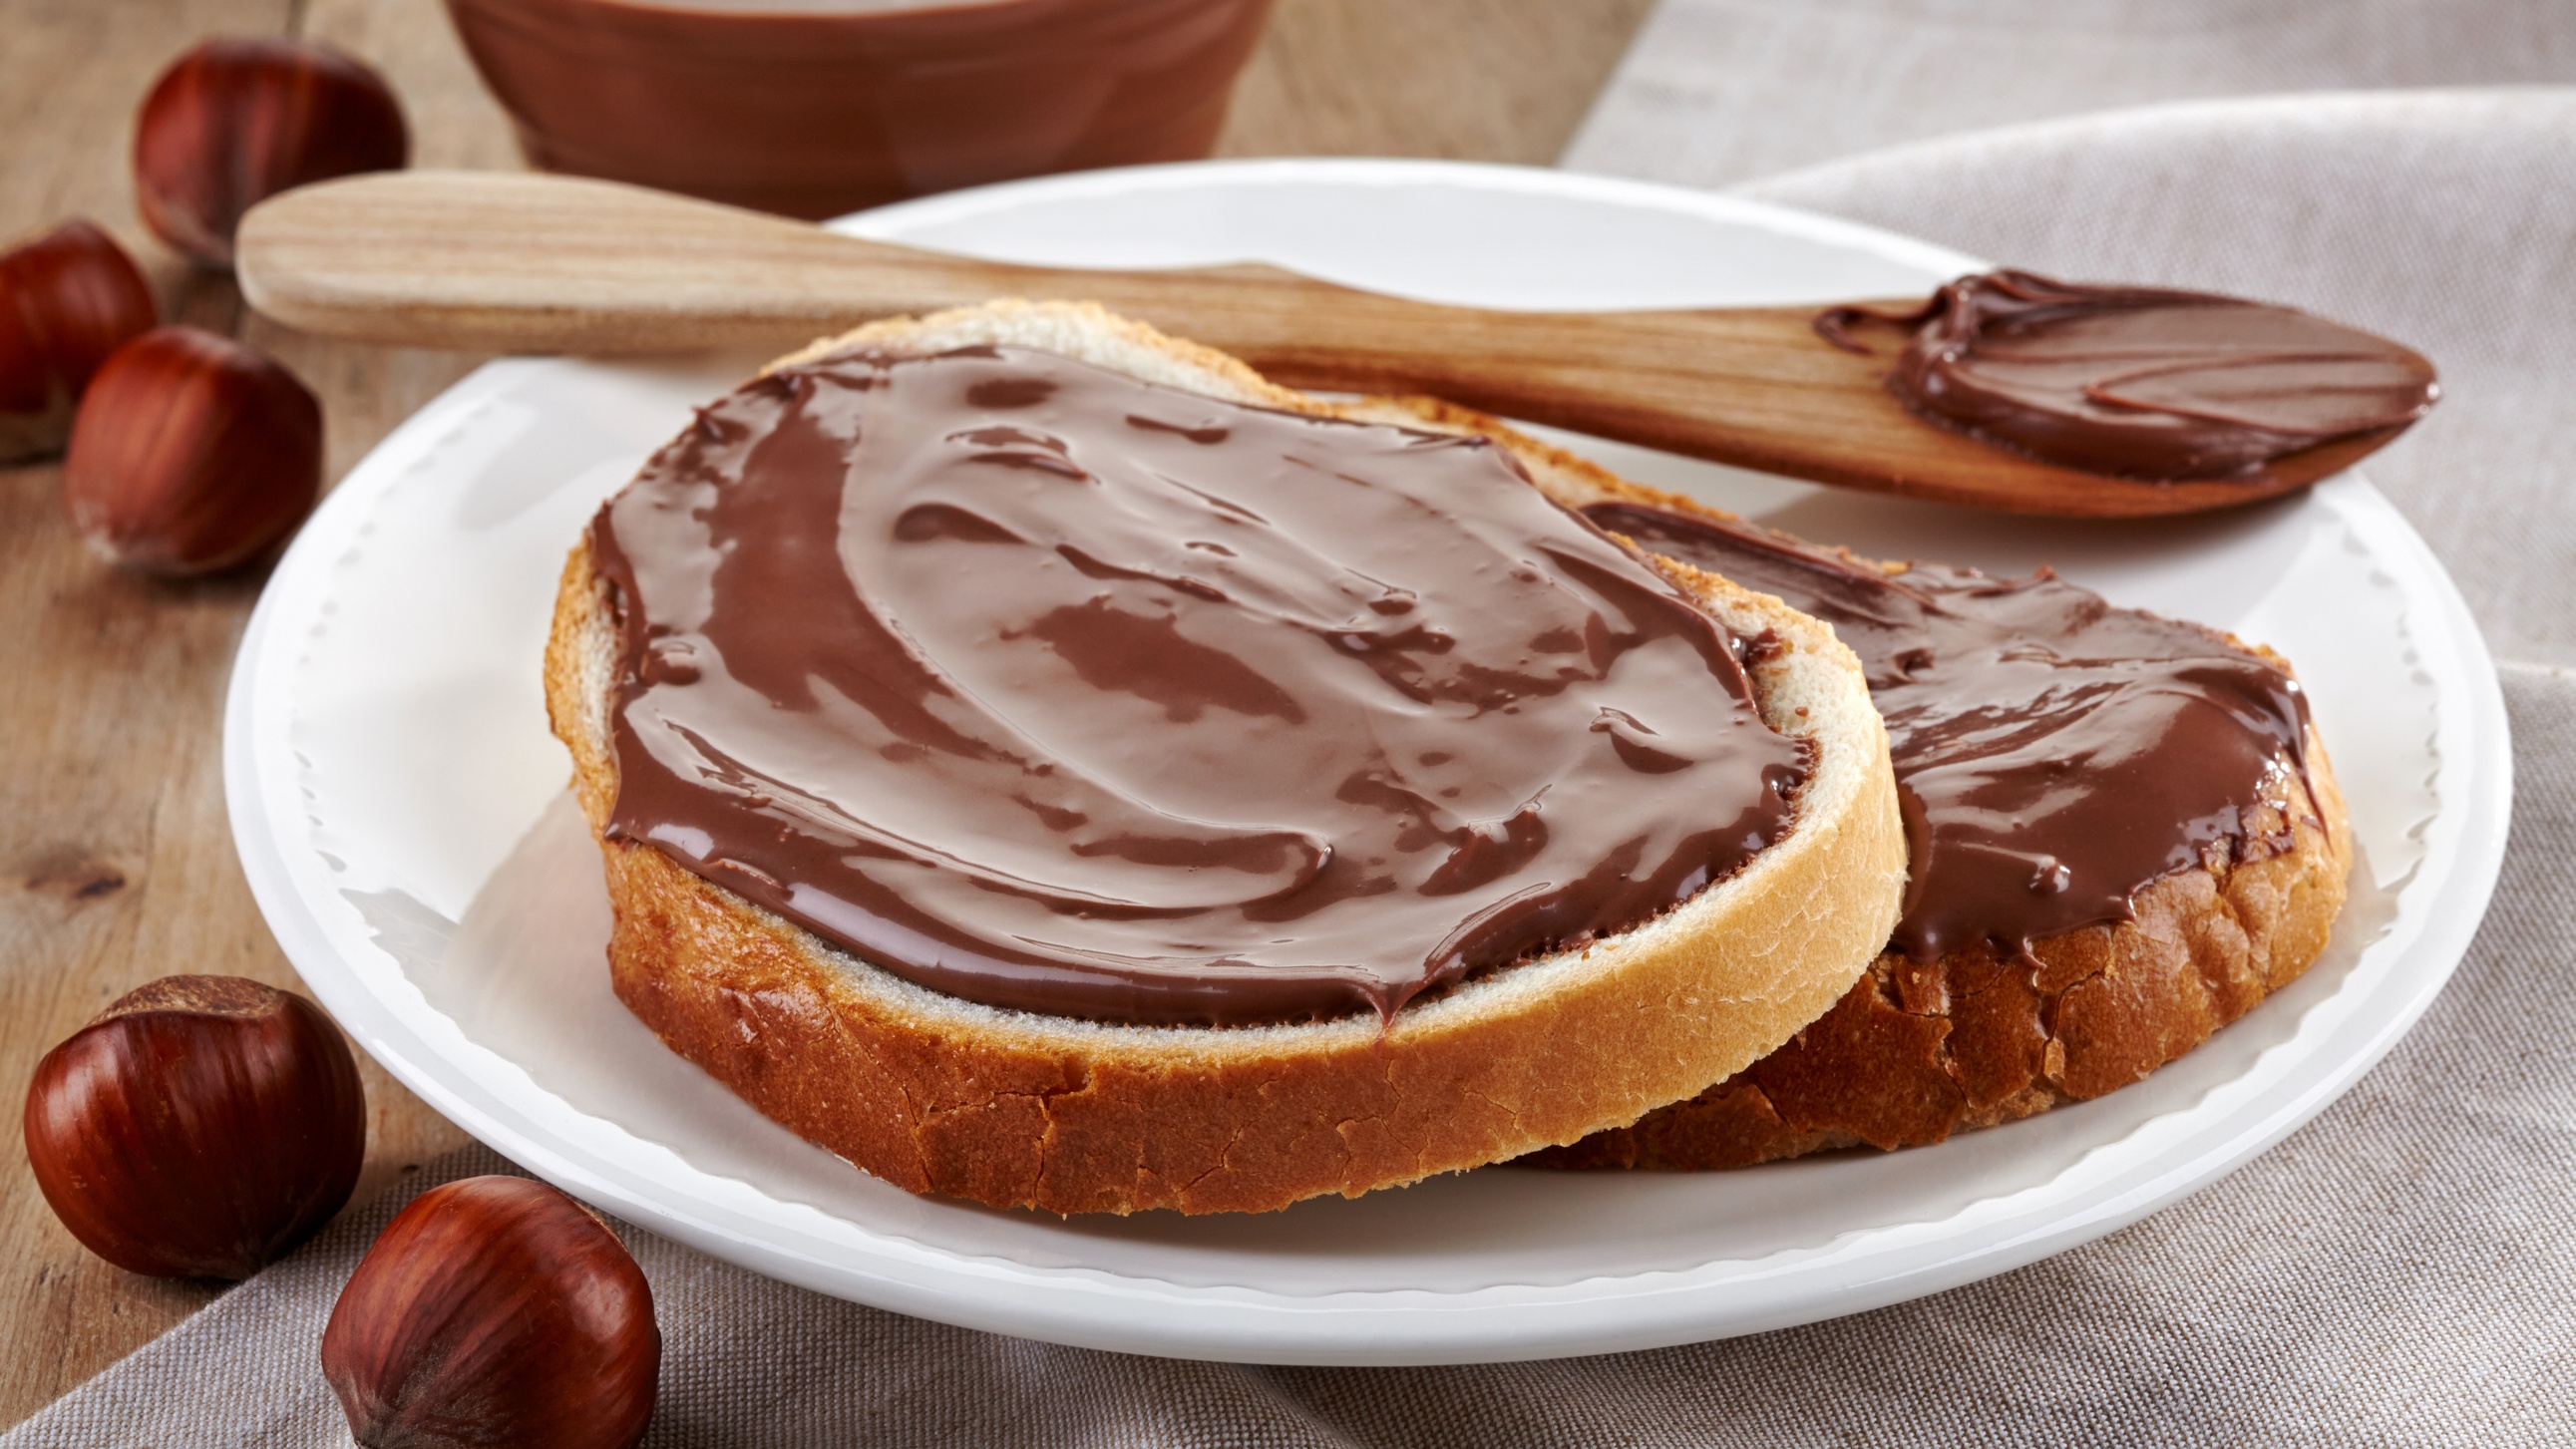 Nutella HD Wallpaper Background Image